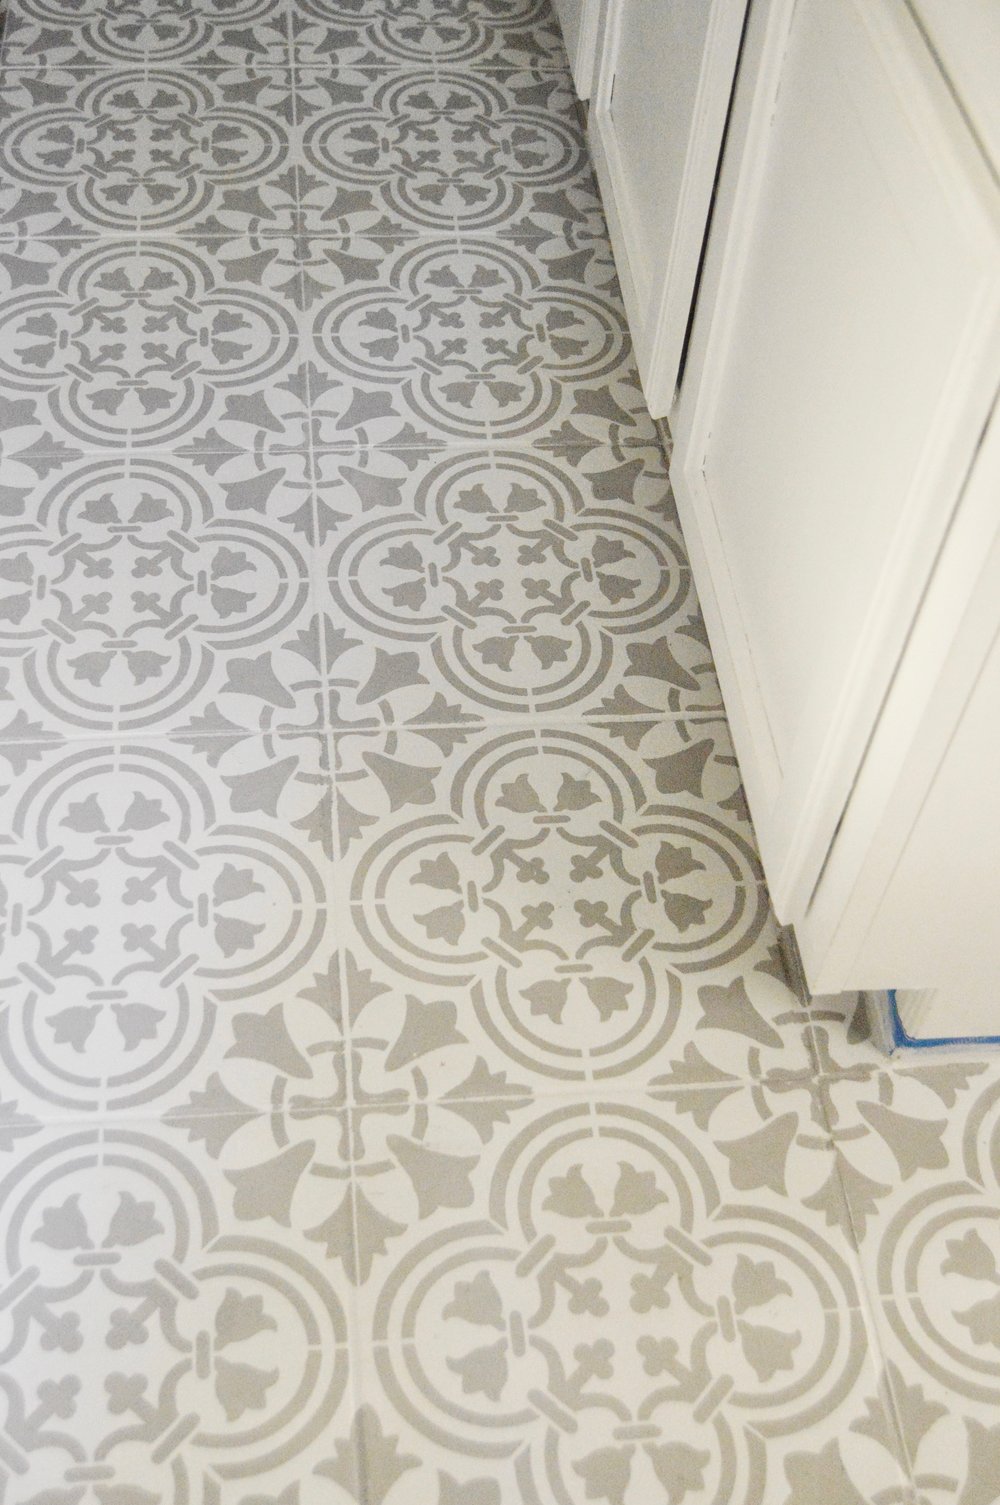 Ideas For Covering Up Tile Floors, Covering Kitchen Floor Tiles